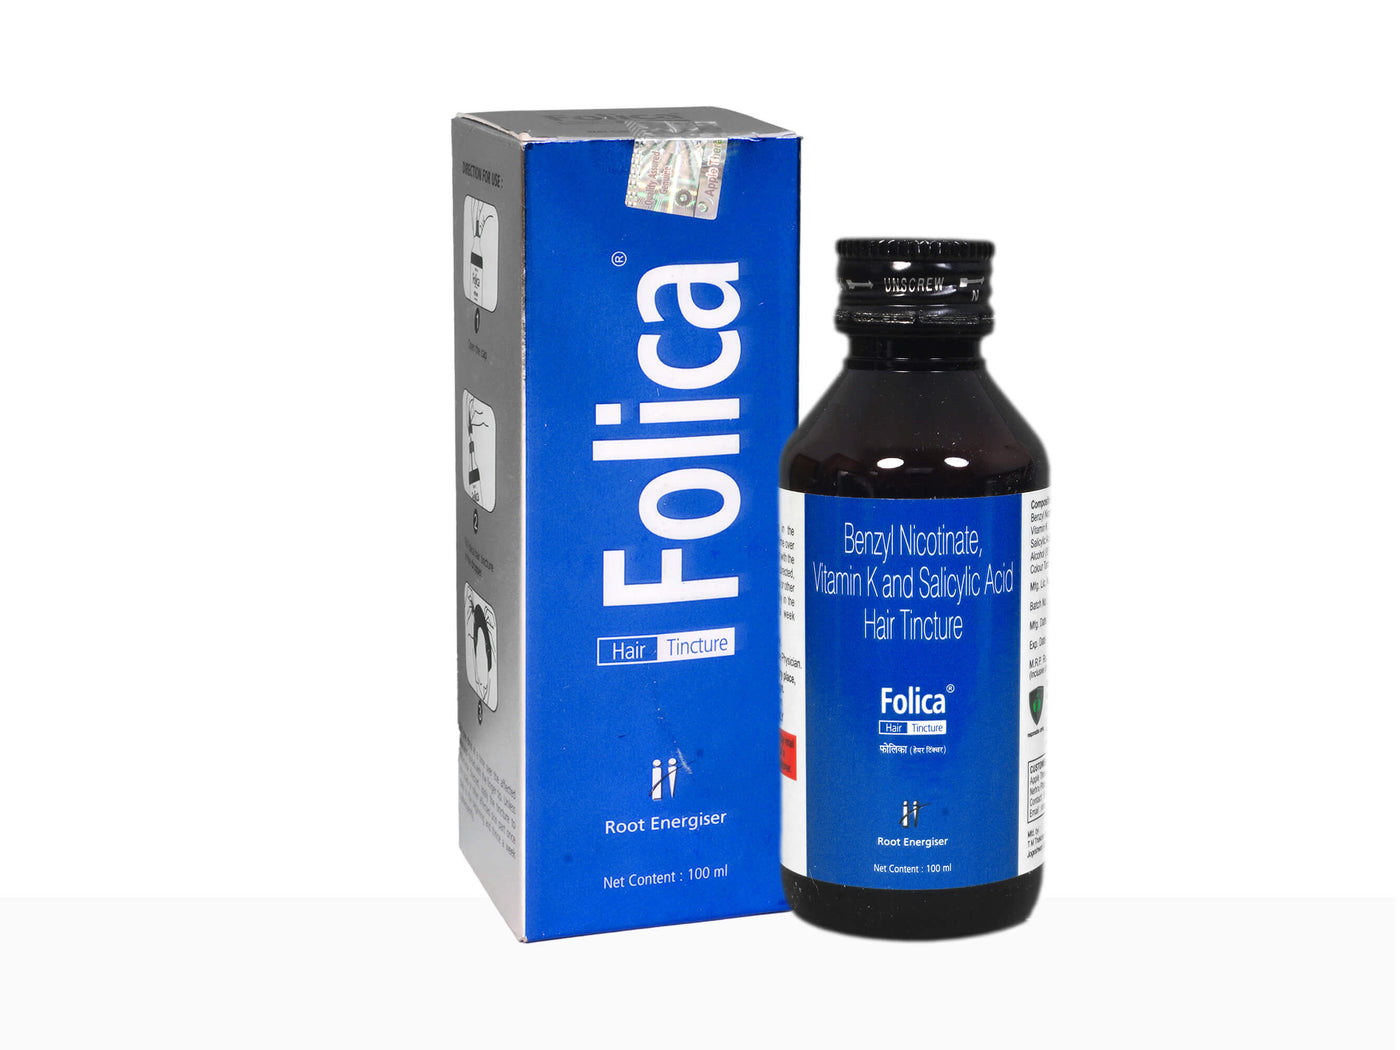 Folica Hair Tincture Buy bottle of 100 ml Solution at best price in India   1mg